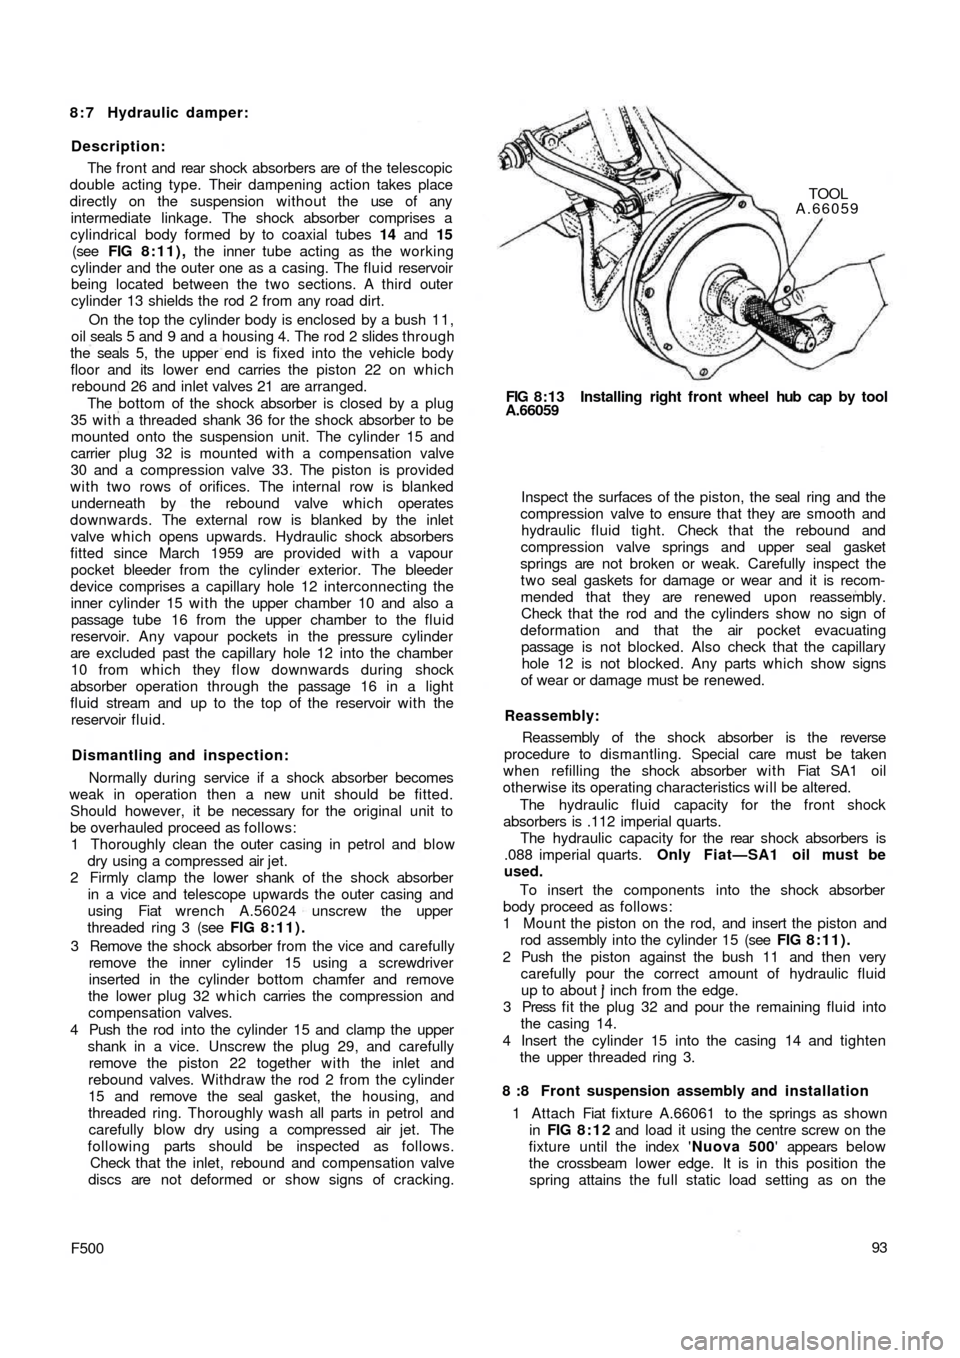 FIAT 500 1967 1.G Workshop Manual 8 : 7 Hydraulic damper:
Description:
The front and rear  shock absorbers are of the telescopic
double acting type. Their dampening action takes place
directly on the suspension without the use of any
